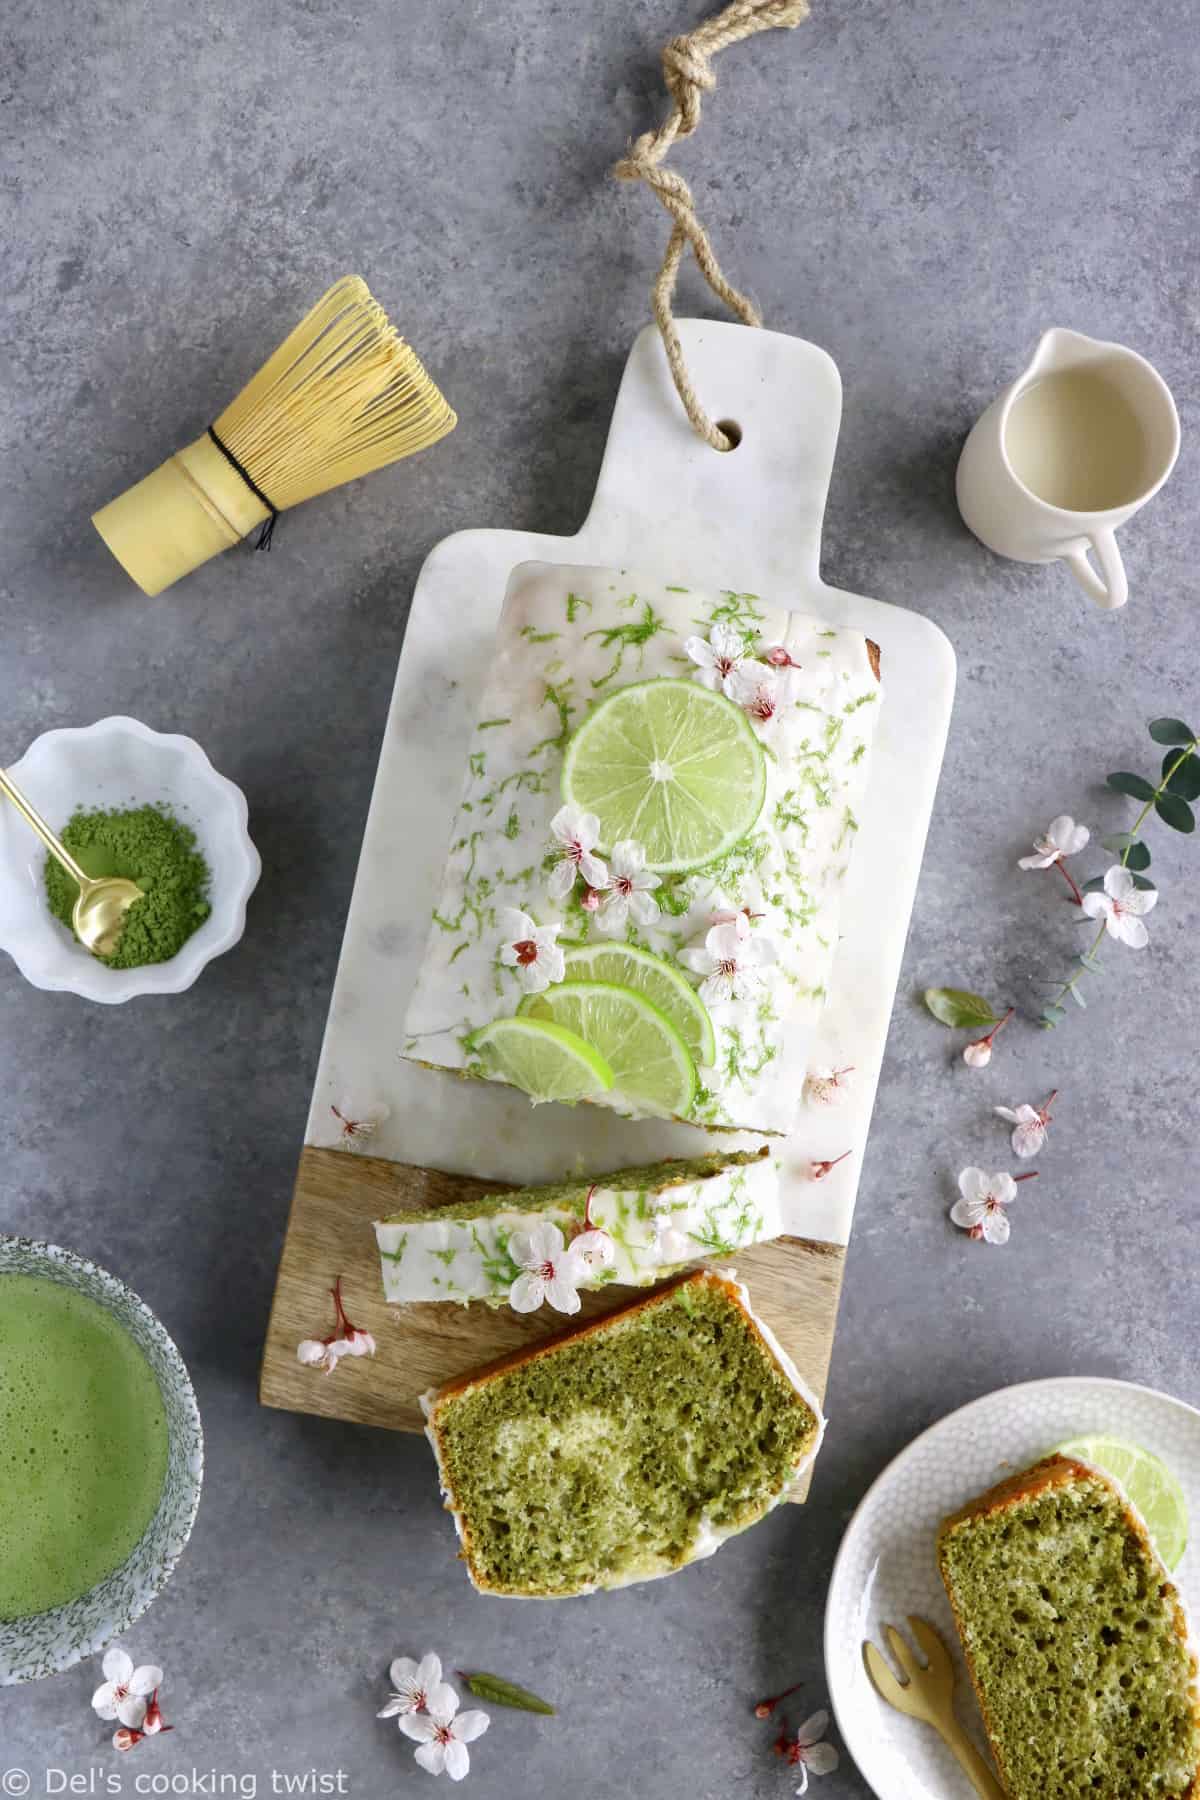 This matcha marble pound cake is the perfect addition to your afternoon tea. Made entirely dairy-free, it offers a perfect balance between sweet, earthy flavors and refreshing lime notes.